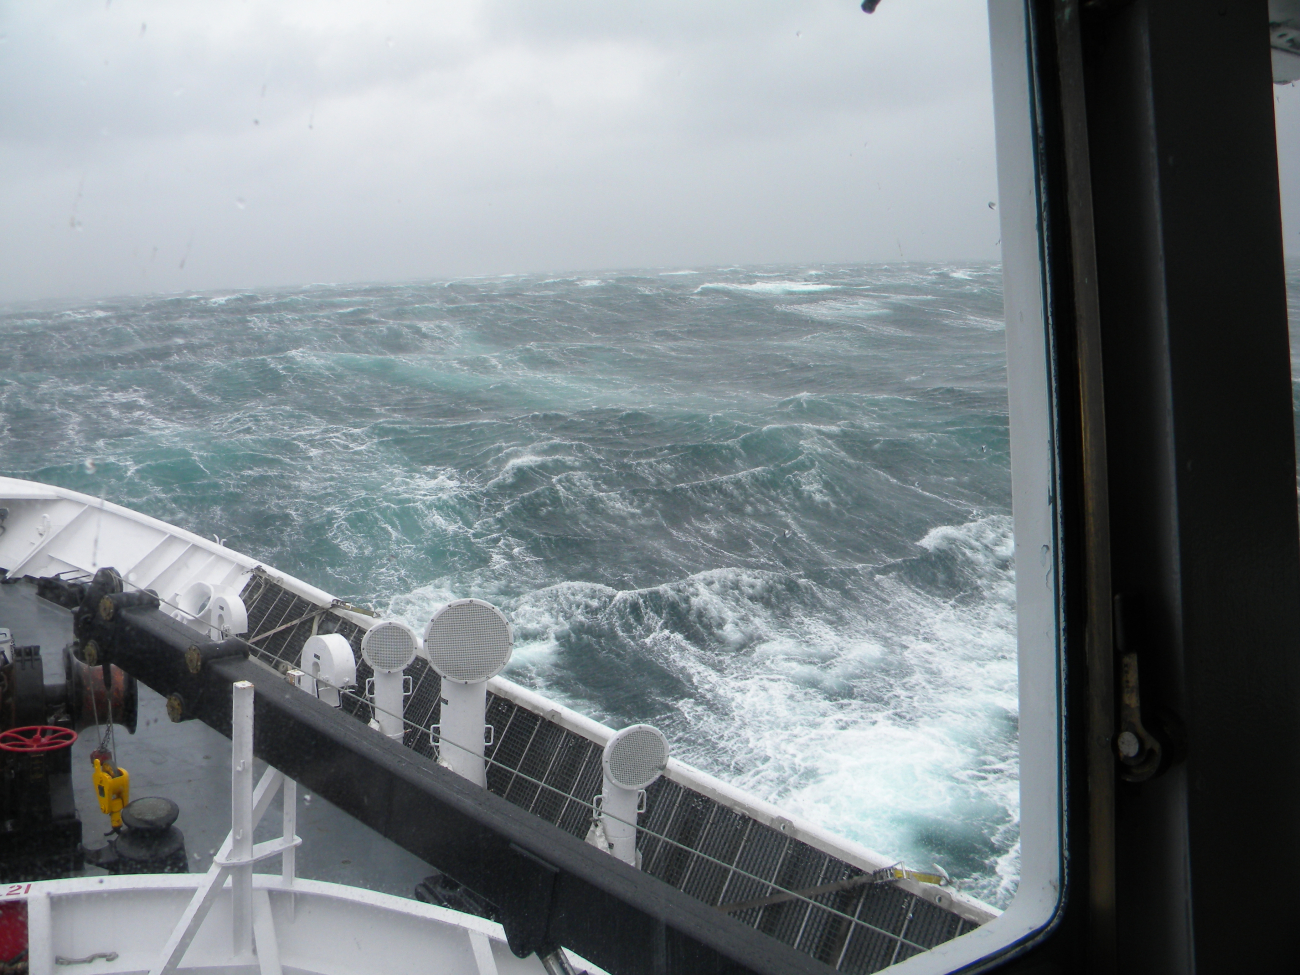 NOAA Ship FAIRWEATHER going with the flow in a Chatham Strait storm